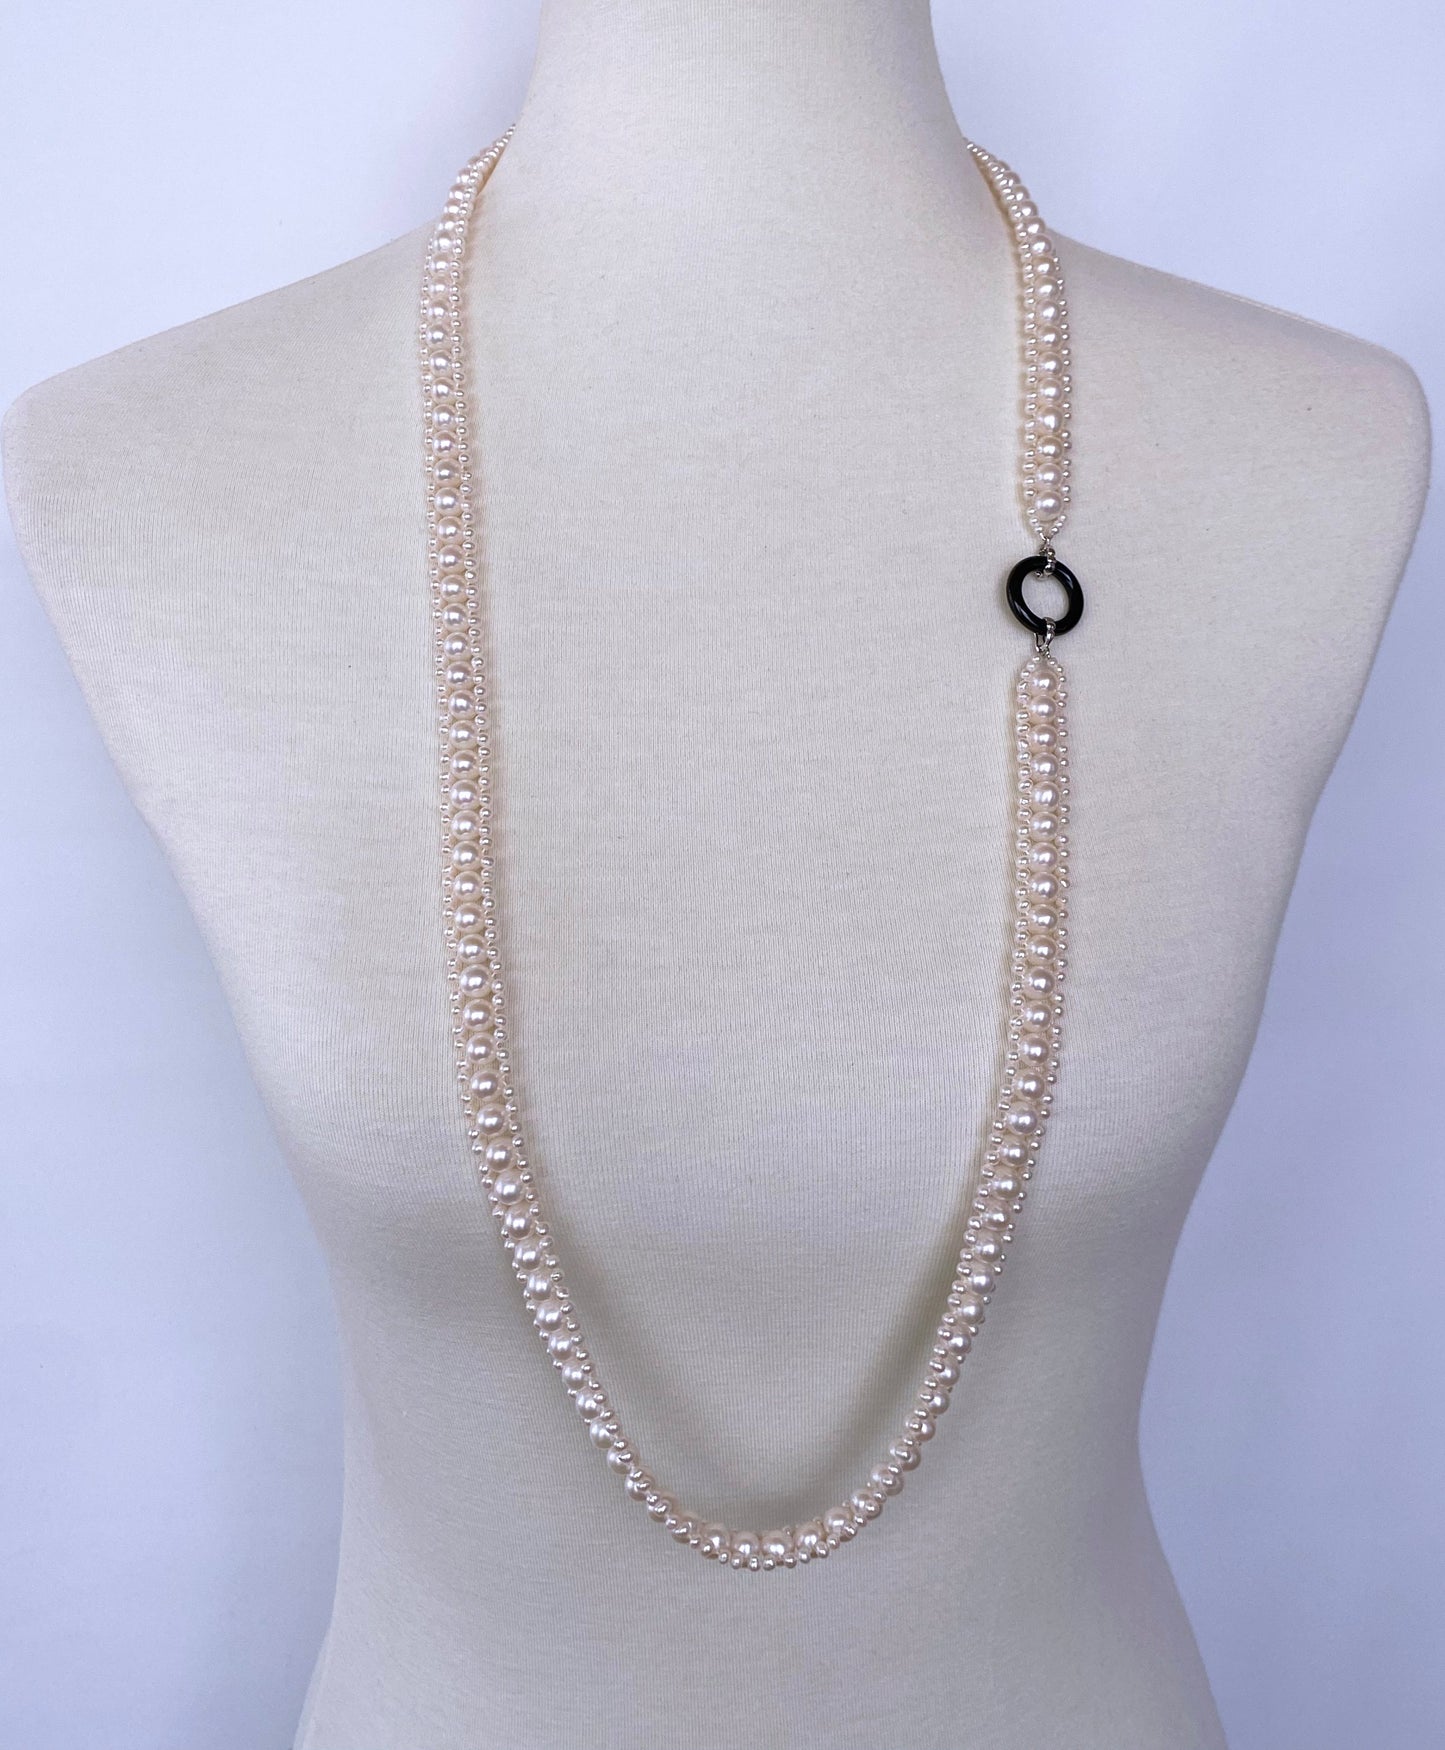 Marina J. Woven Pearl Sautoir with Black Onyx and Silver